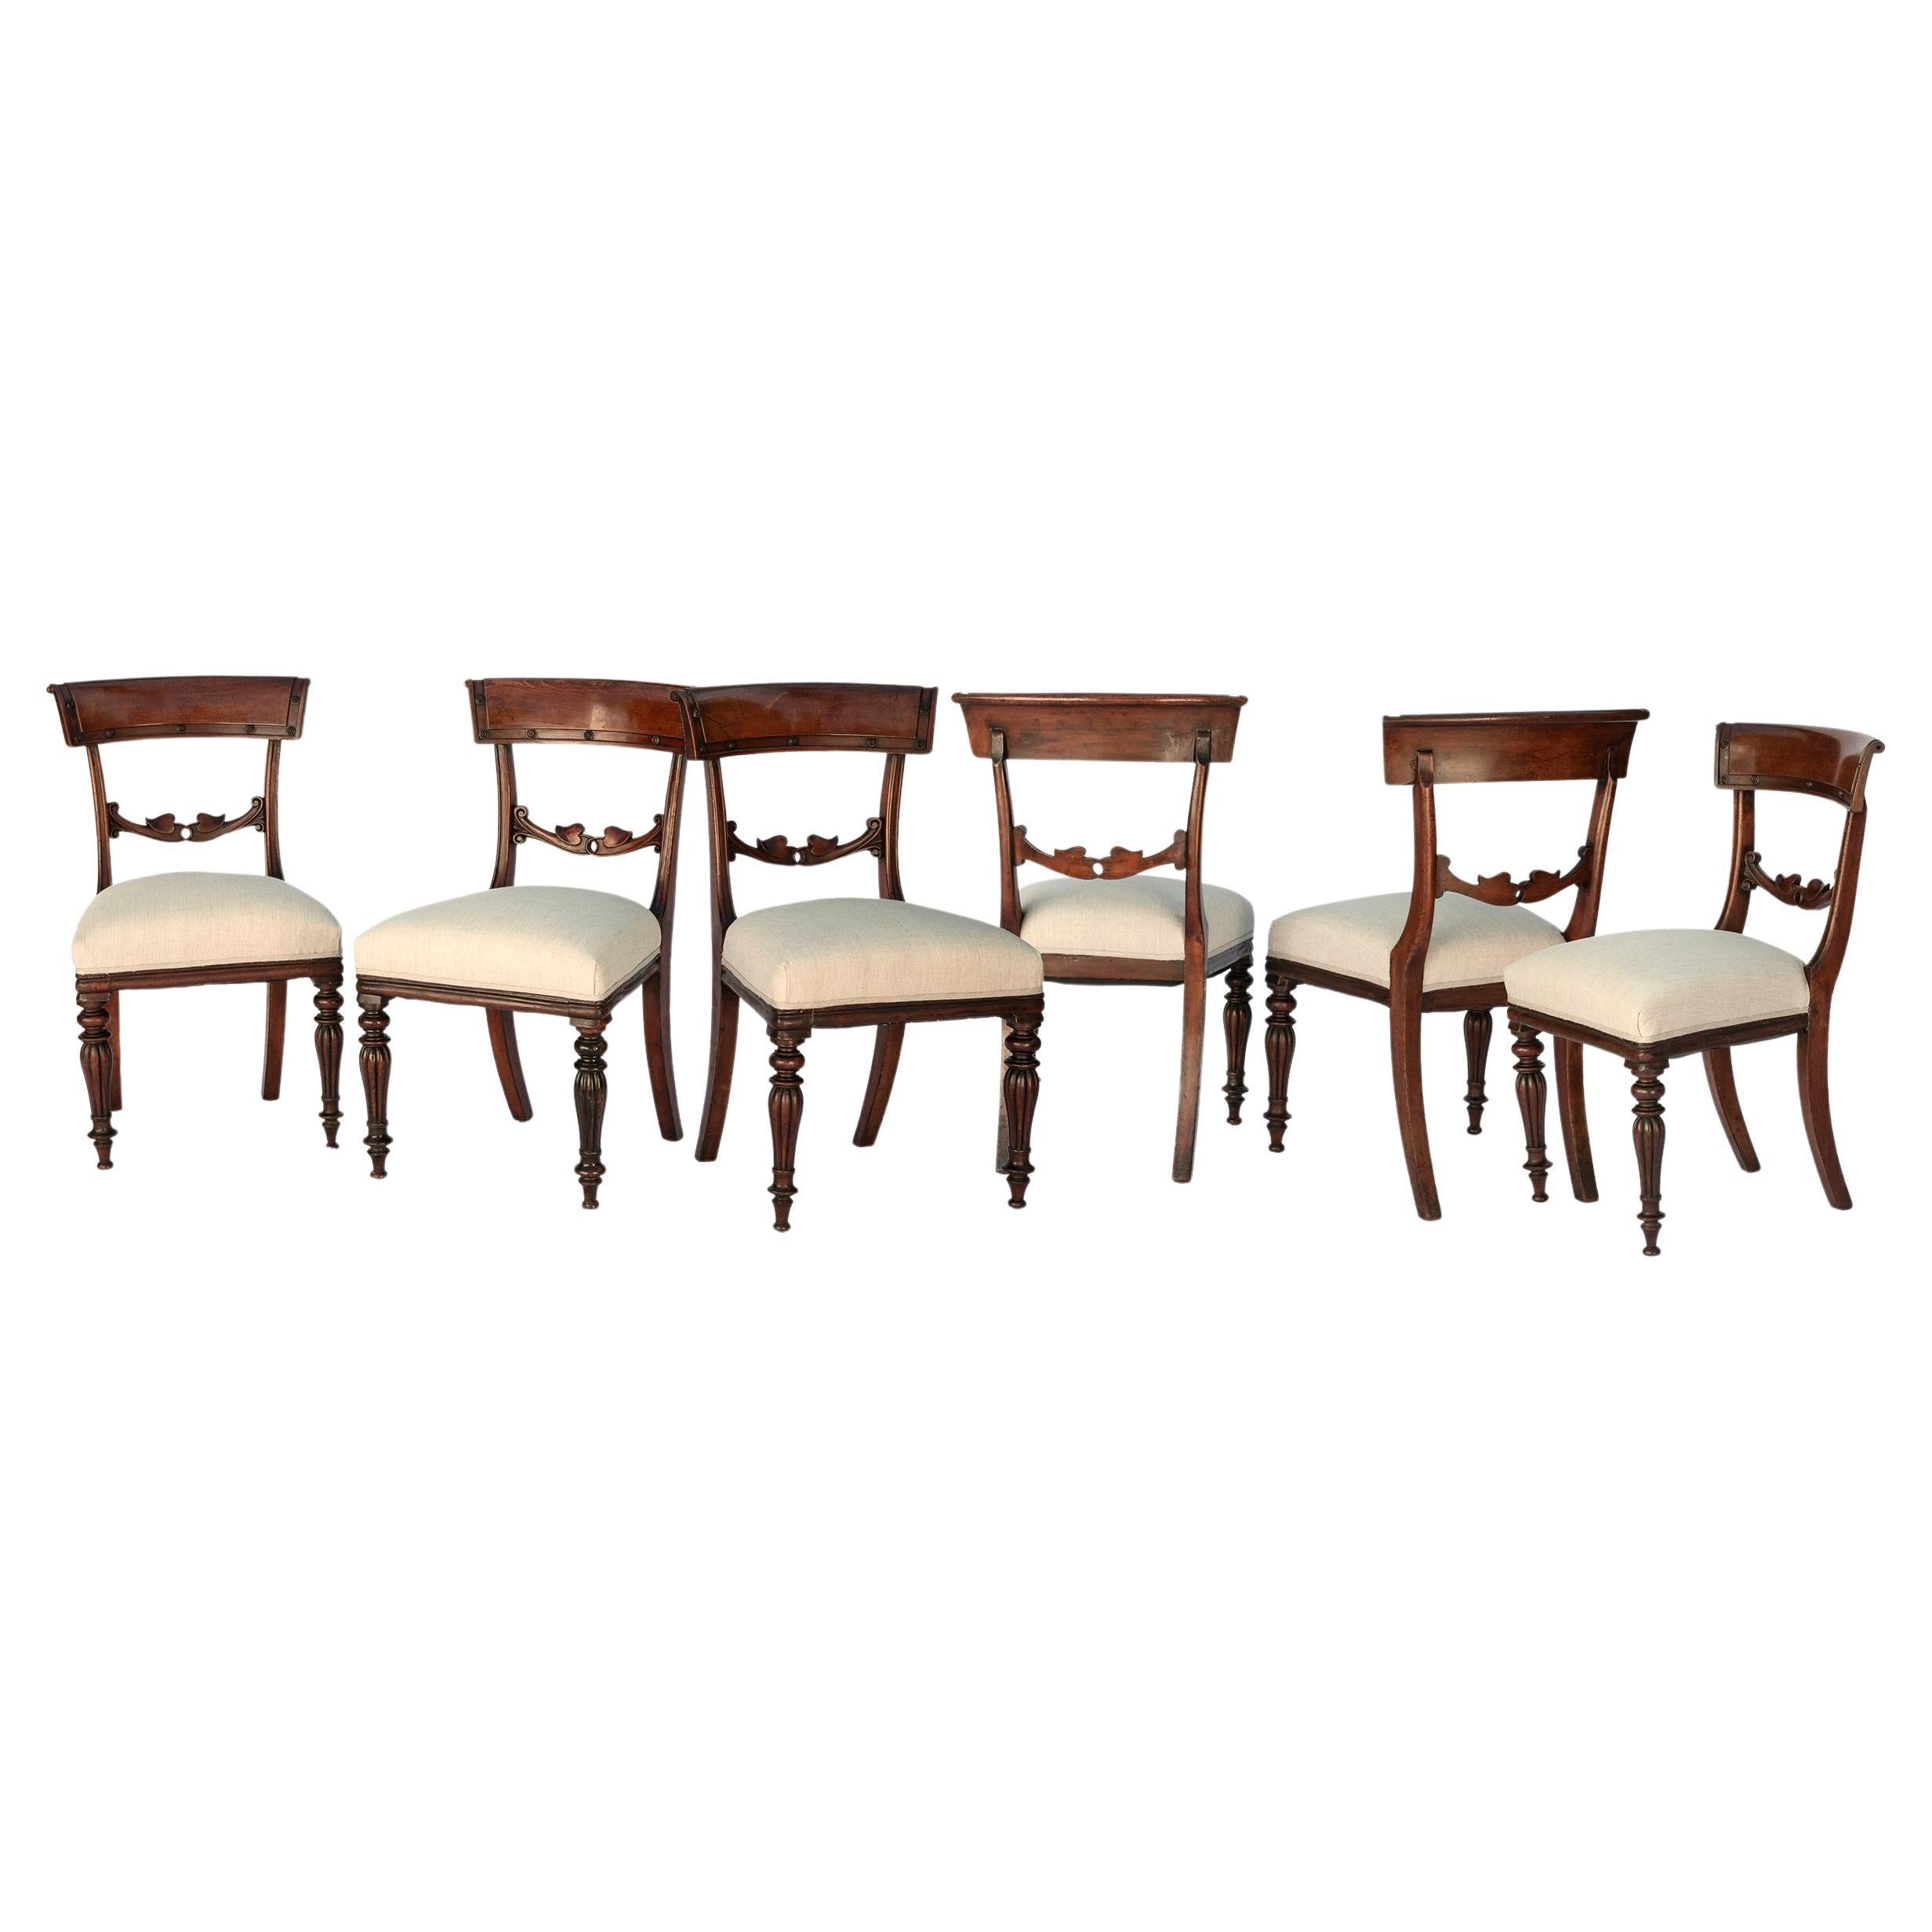 Neoclassical Empire Period Mahogany Dining Chairs For Sale